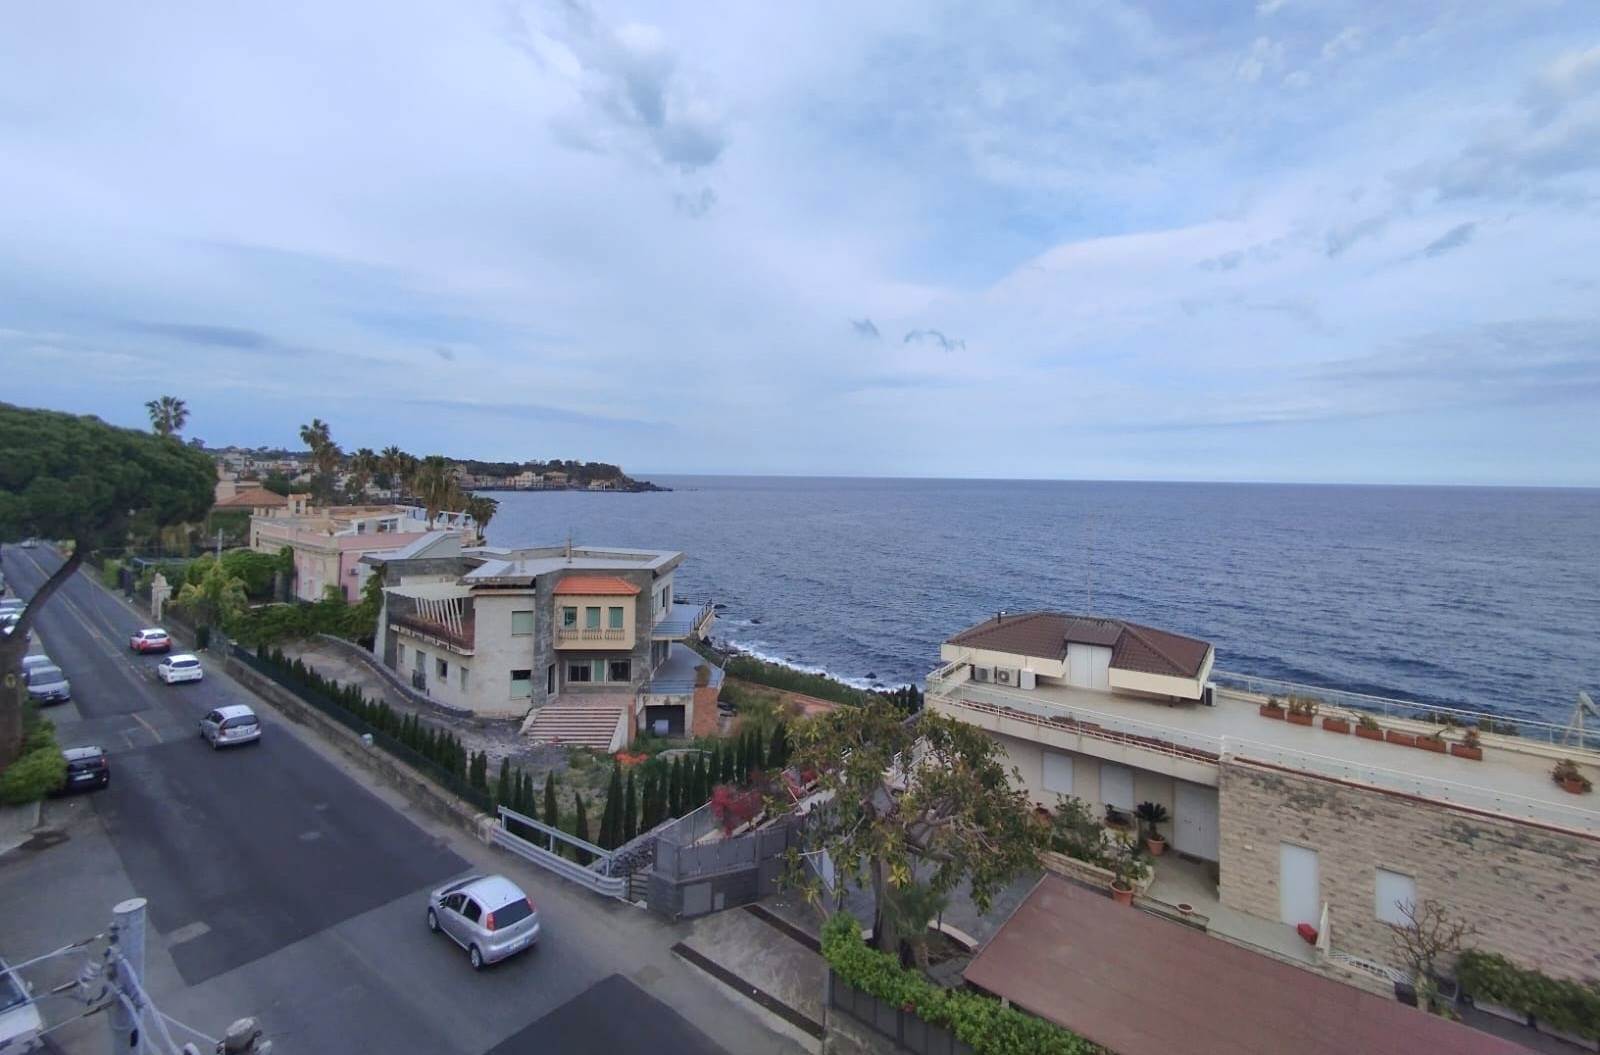 ACITREZZA, ACI CASTELLO, Apartment for sale of 115 Sq. mt., Almost new, Heating Individual heating system, Energetic class: G, placed at 2° on 3, 